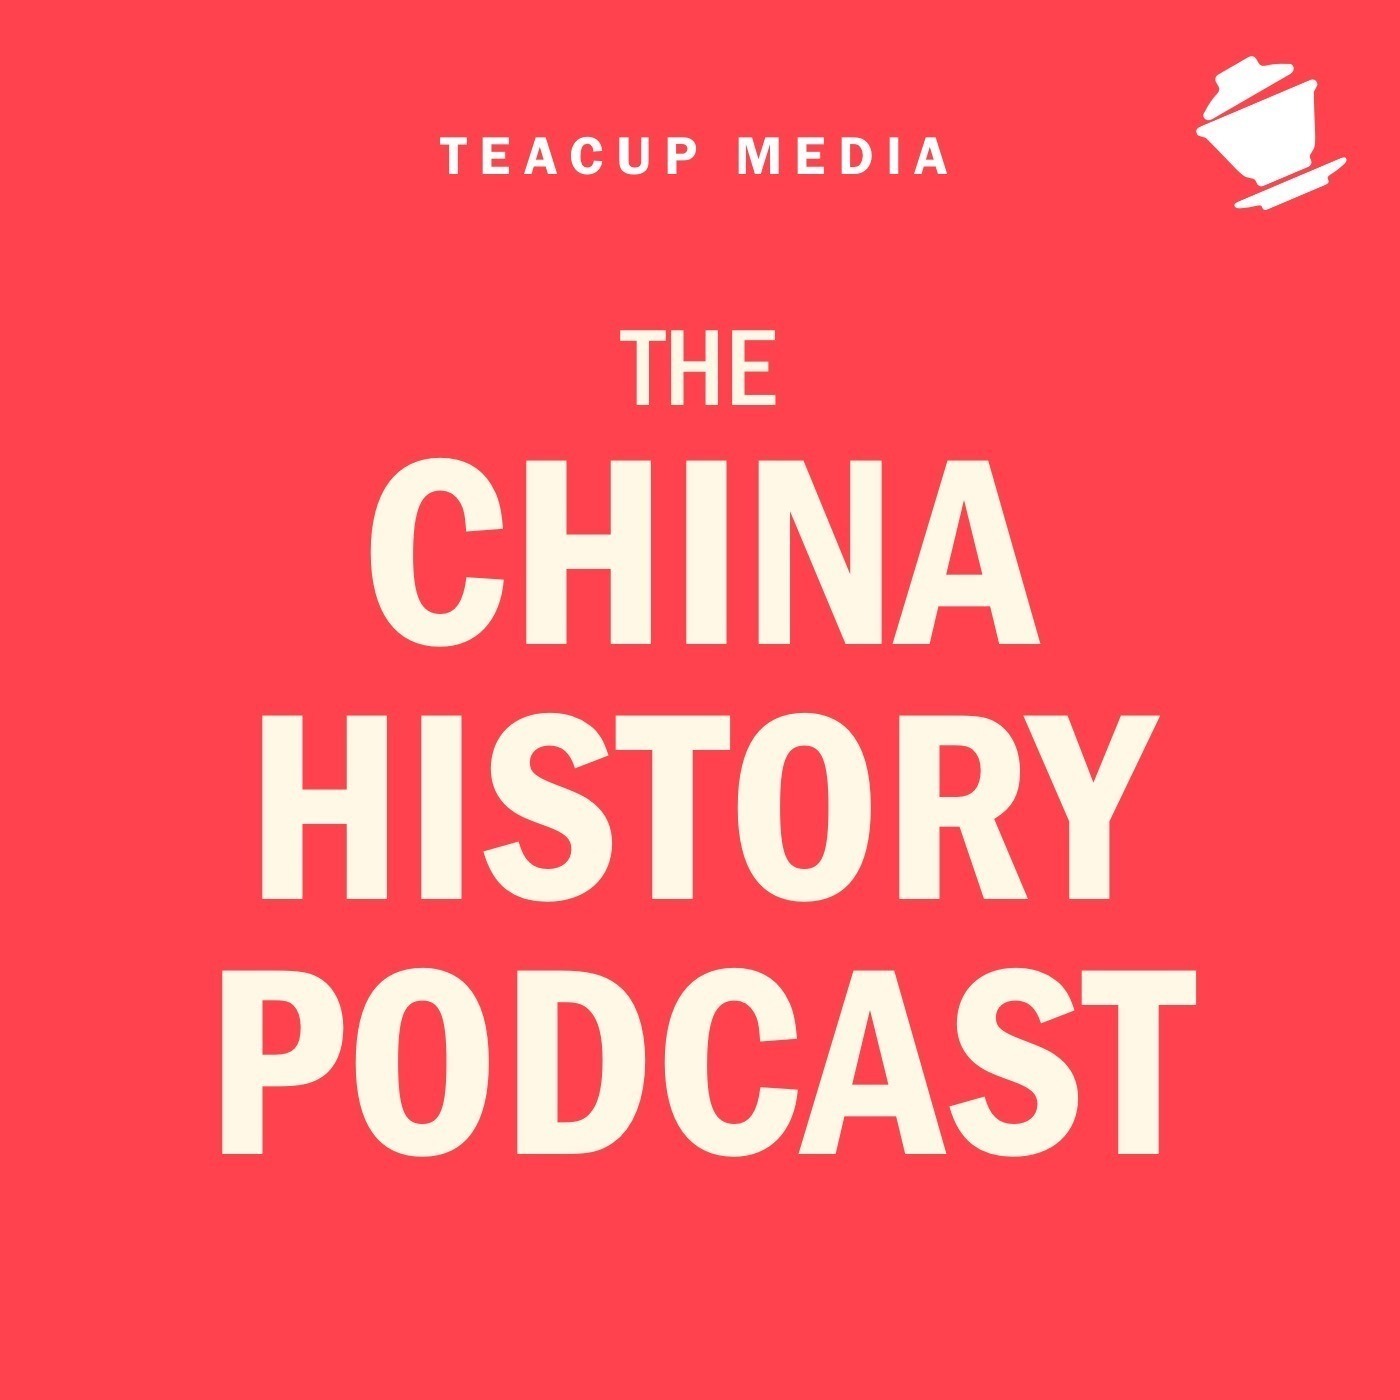 The China History Podcast | RedCircle